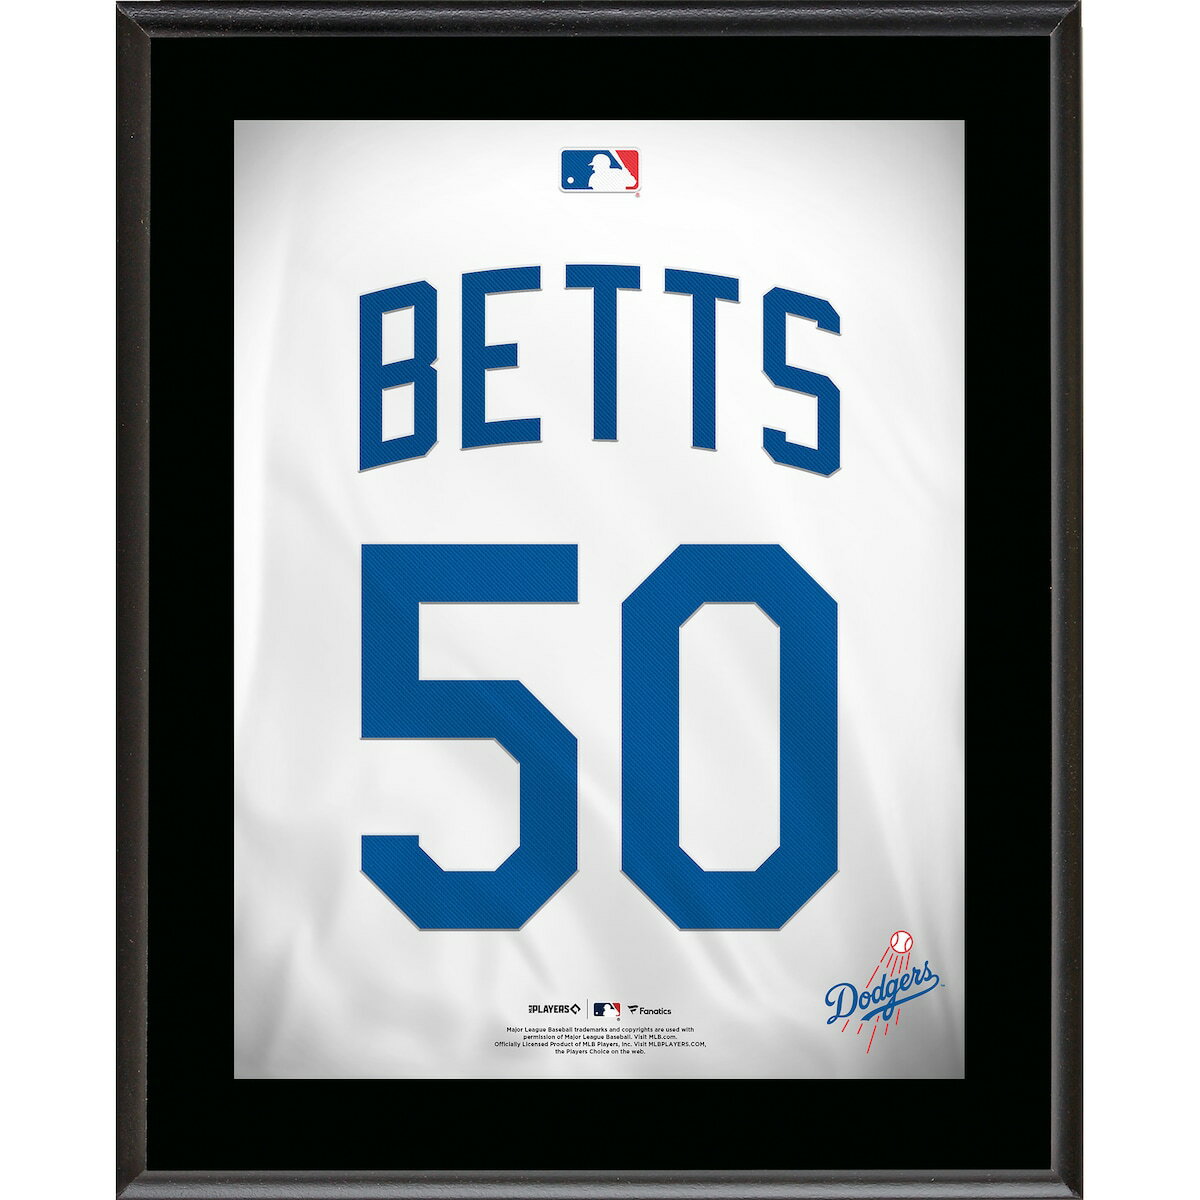 Mookie Betts Los Angeles Dodgers 10.5" x 13" Jersey Number Sublimated Player Plaque